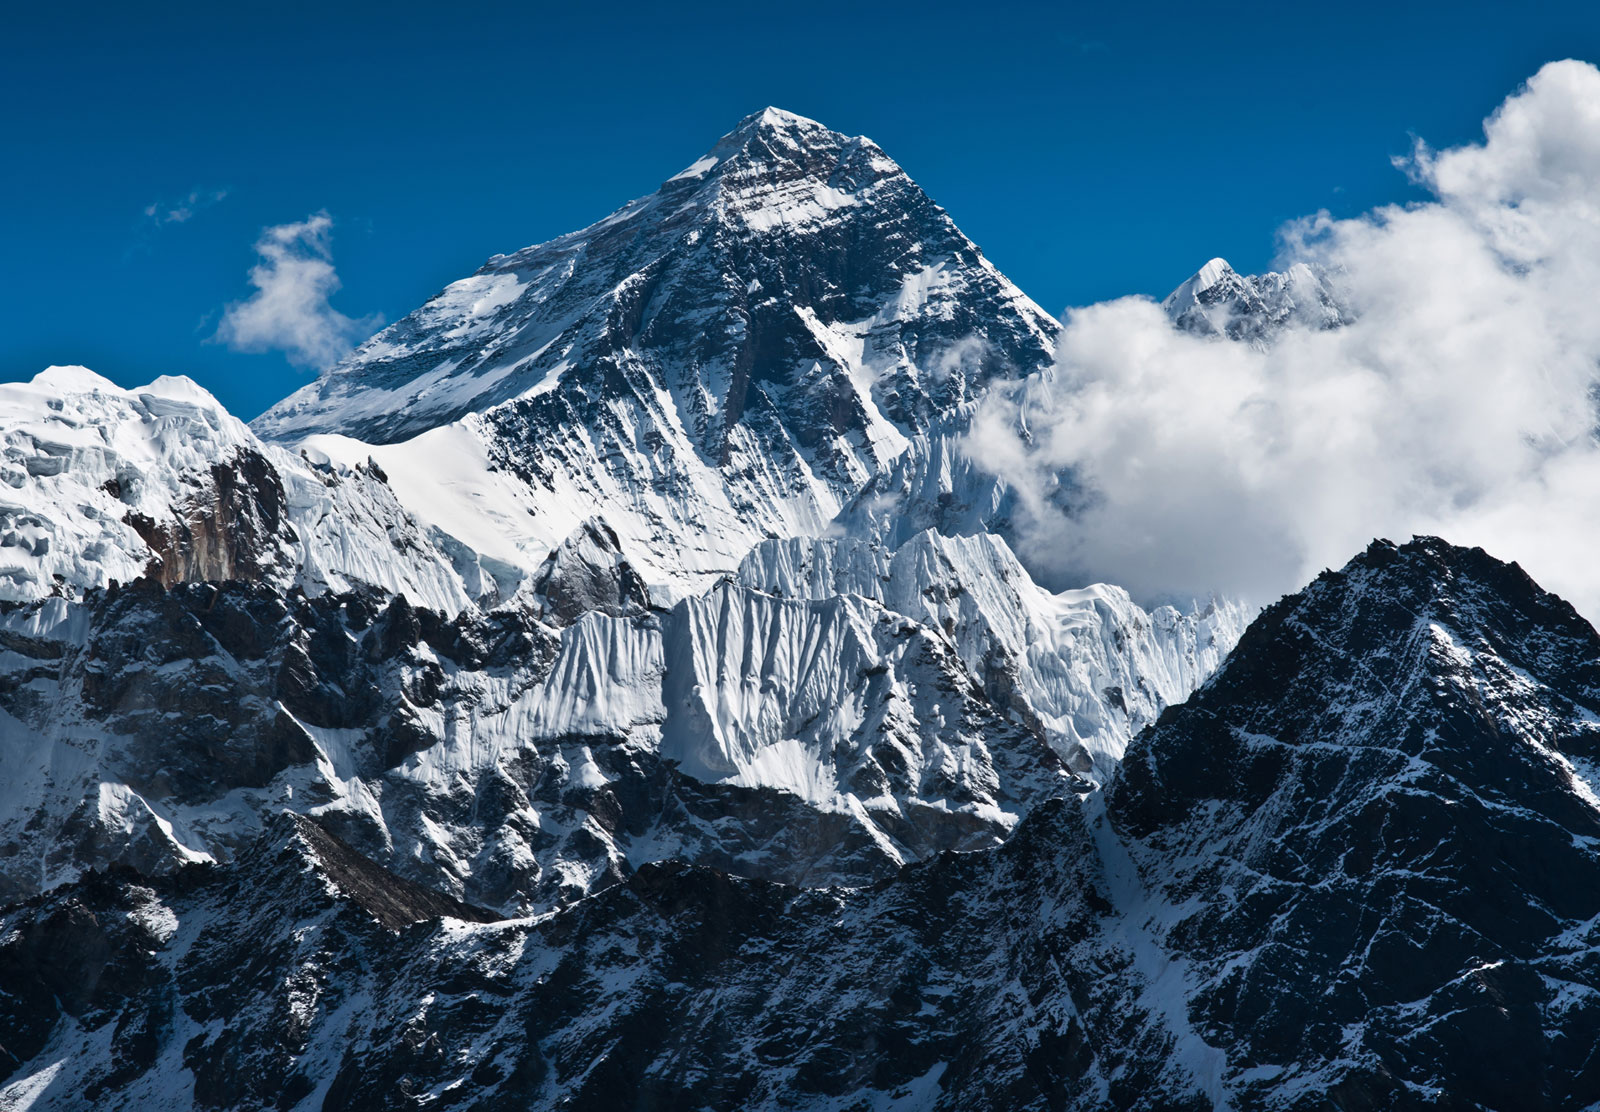 Mount Everest the ultimate challenge